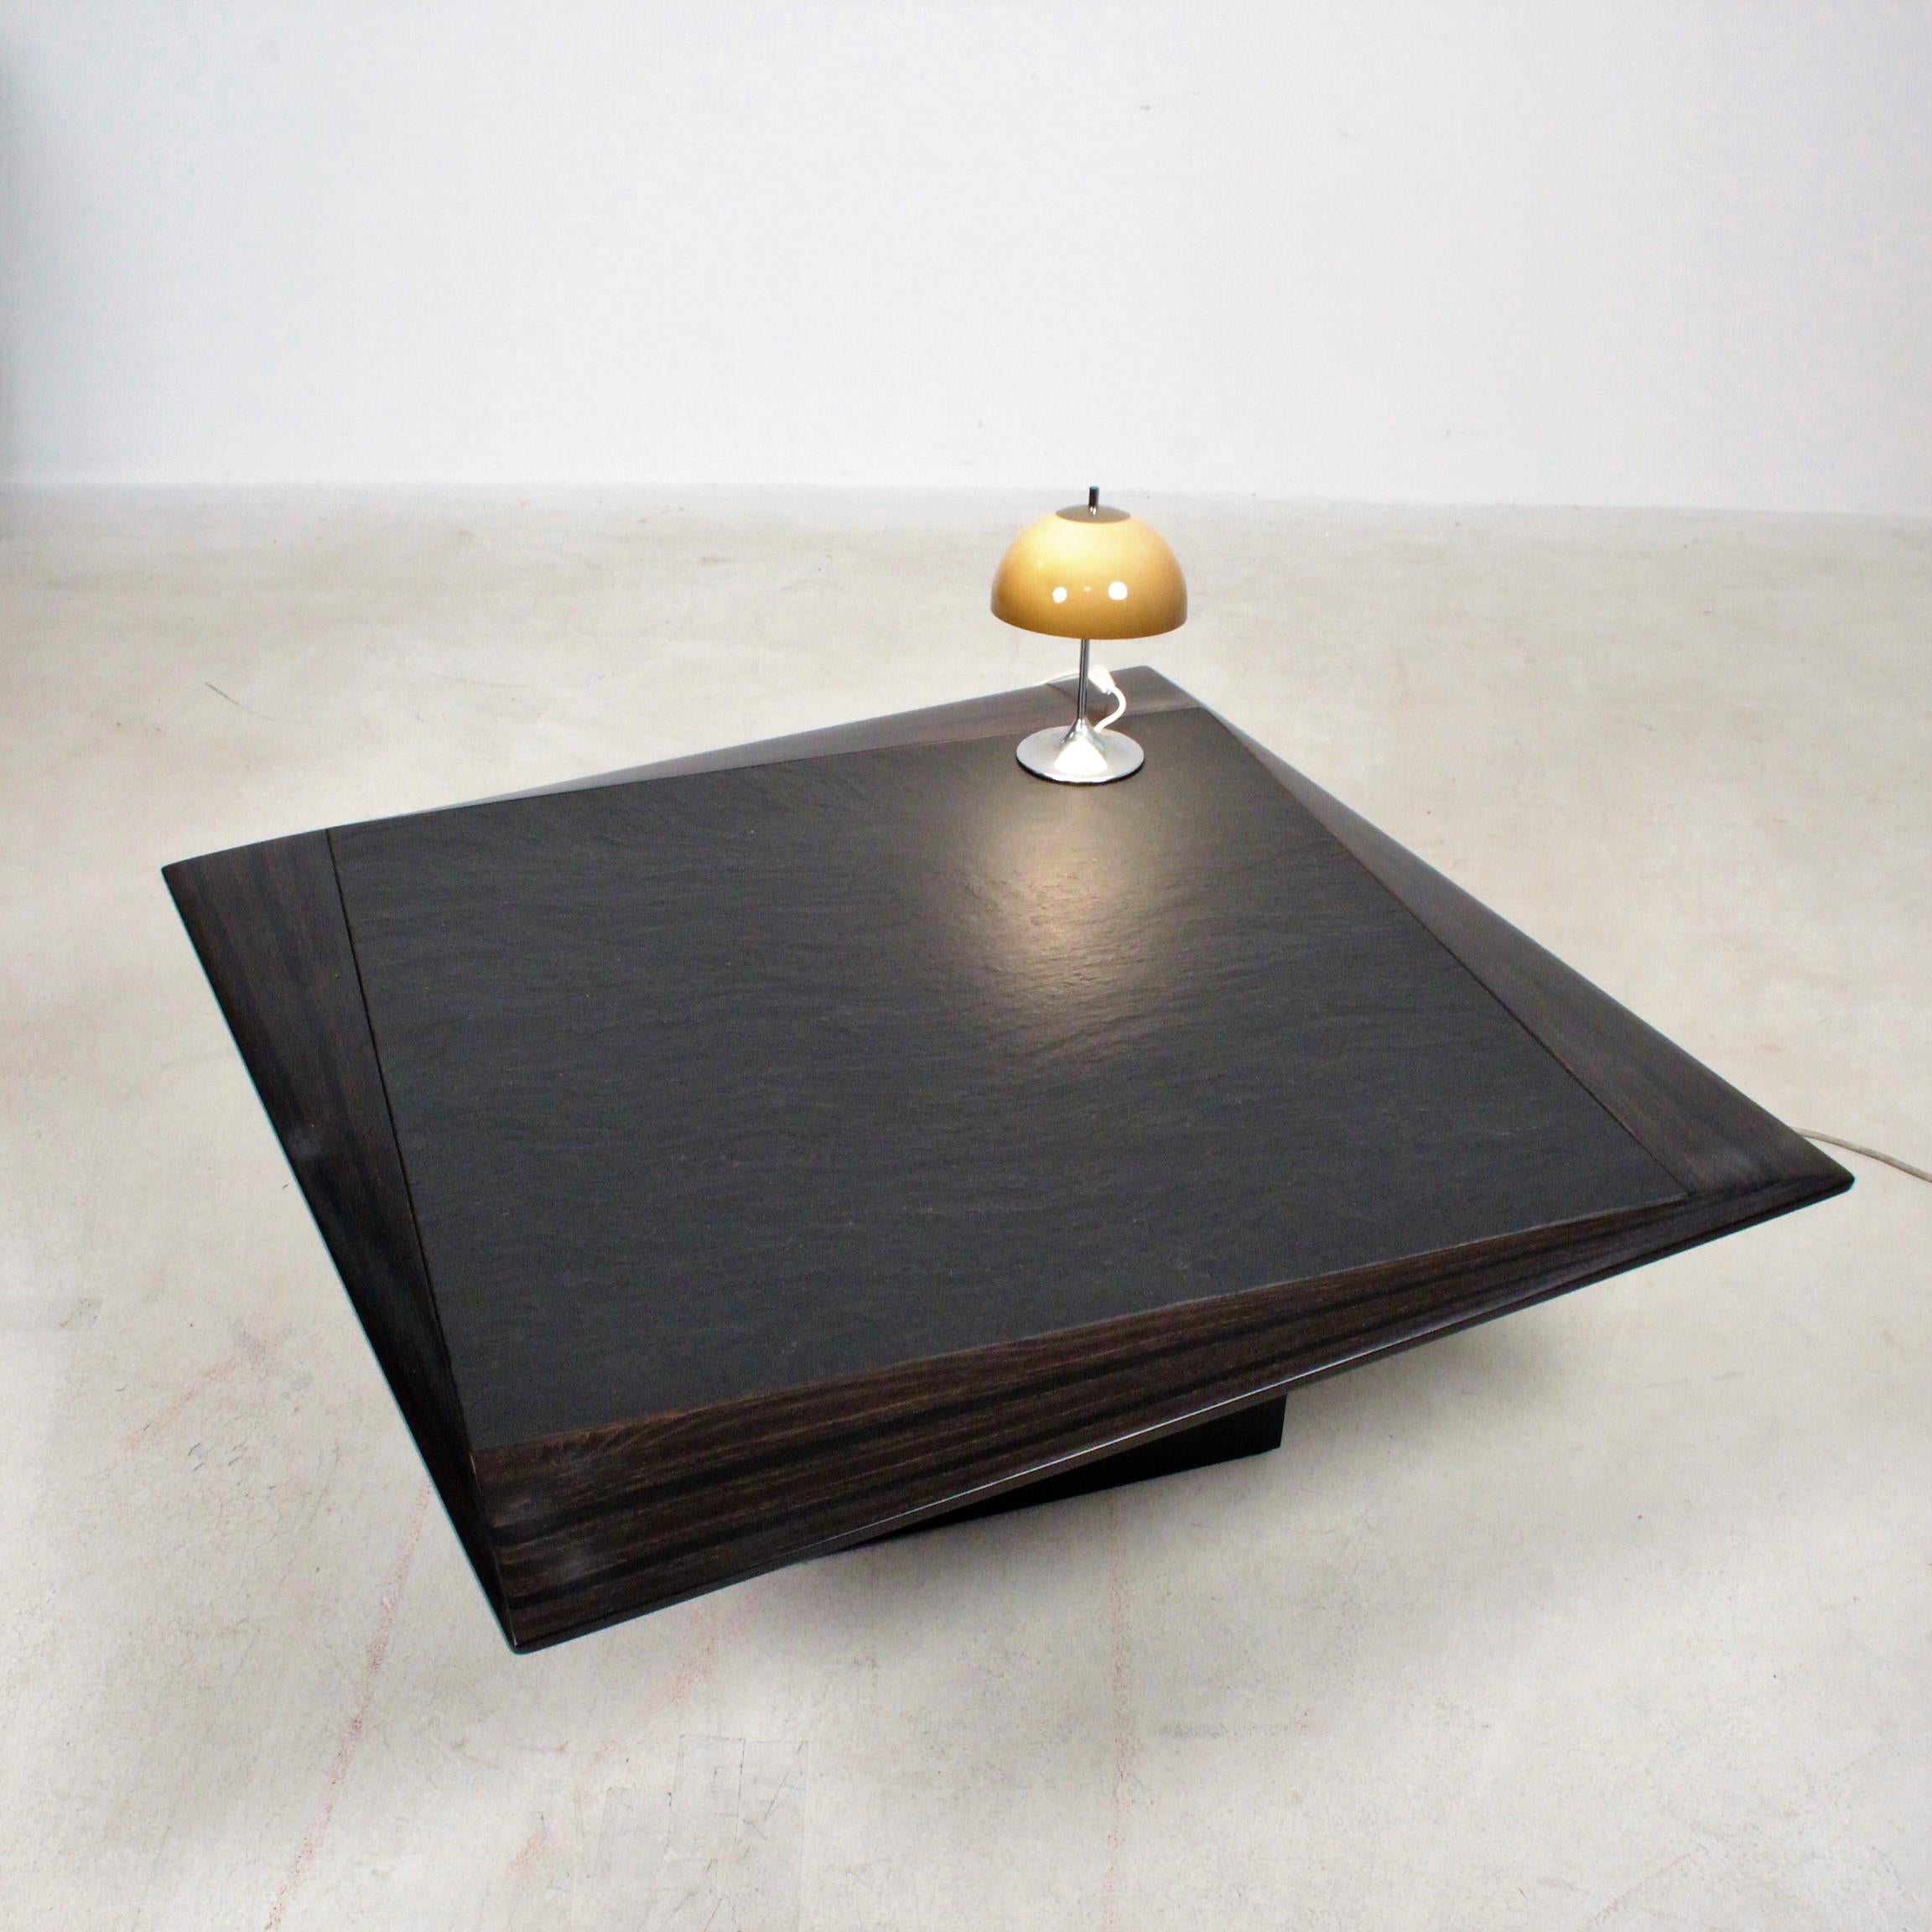 20th Century Table Atributed to Tobia Scarpa, Ebony and slate  Italy, 1970 For Sale